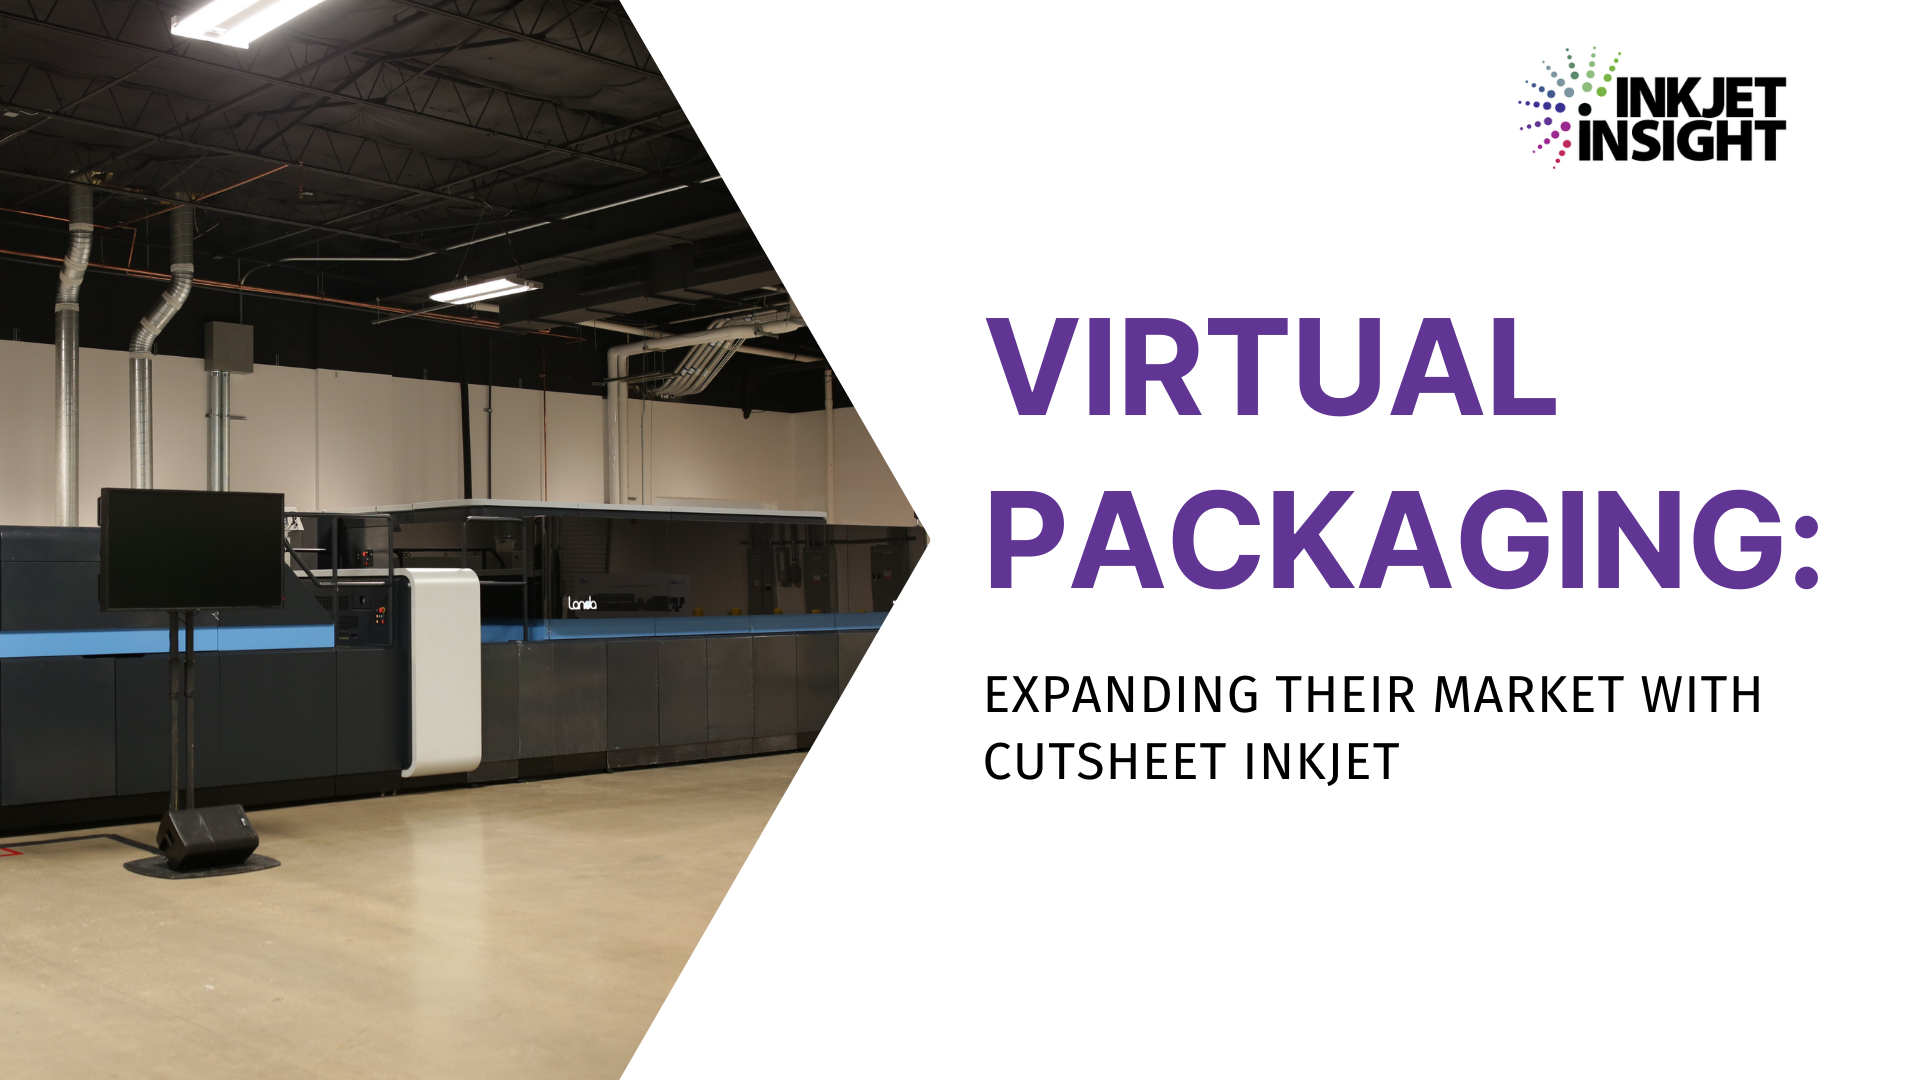 Featured image for “Virtual Packaging: Expanding Their Market with Cutsheet Inkjet”